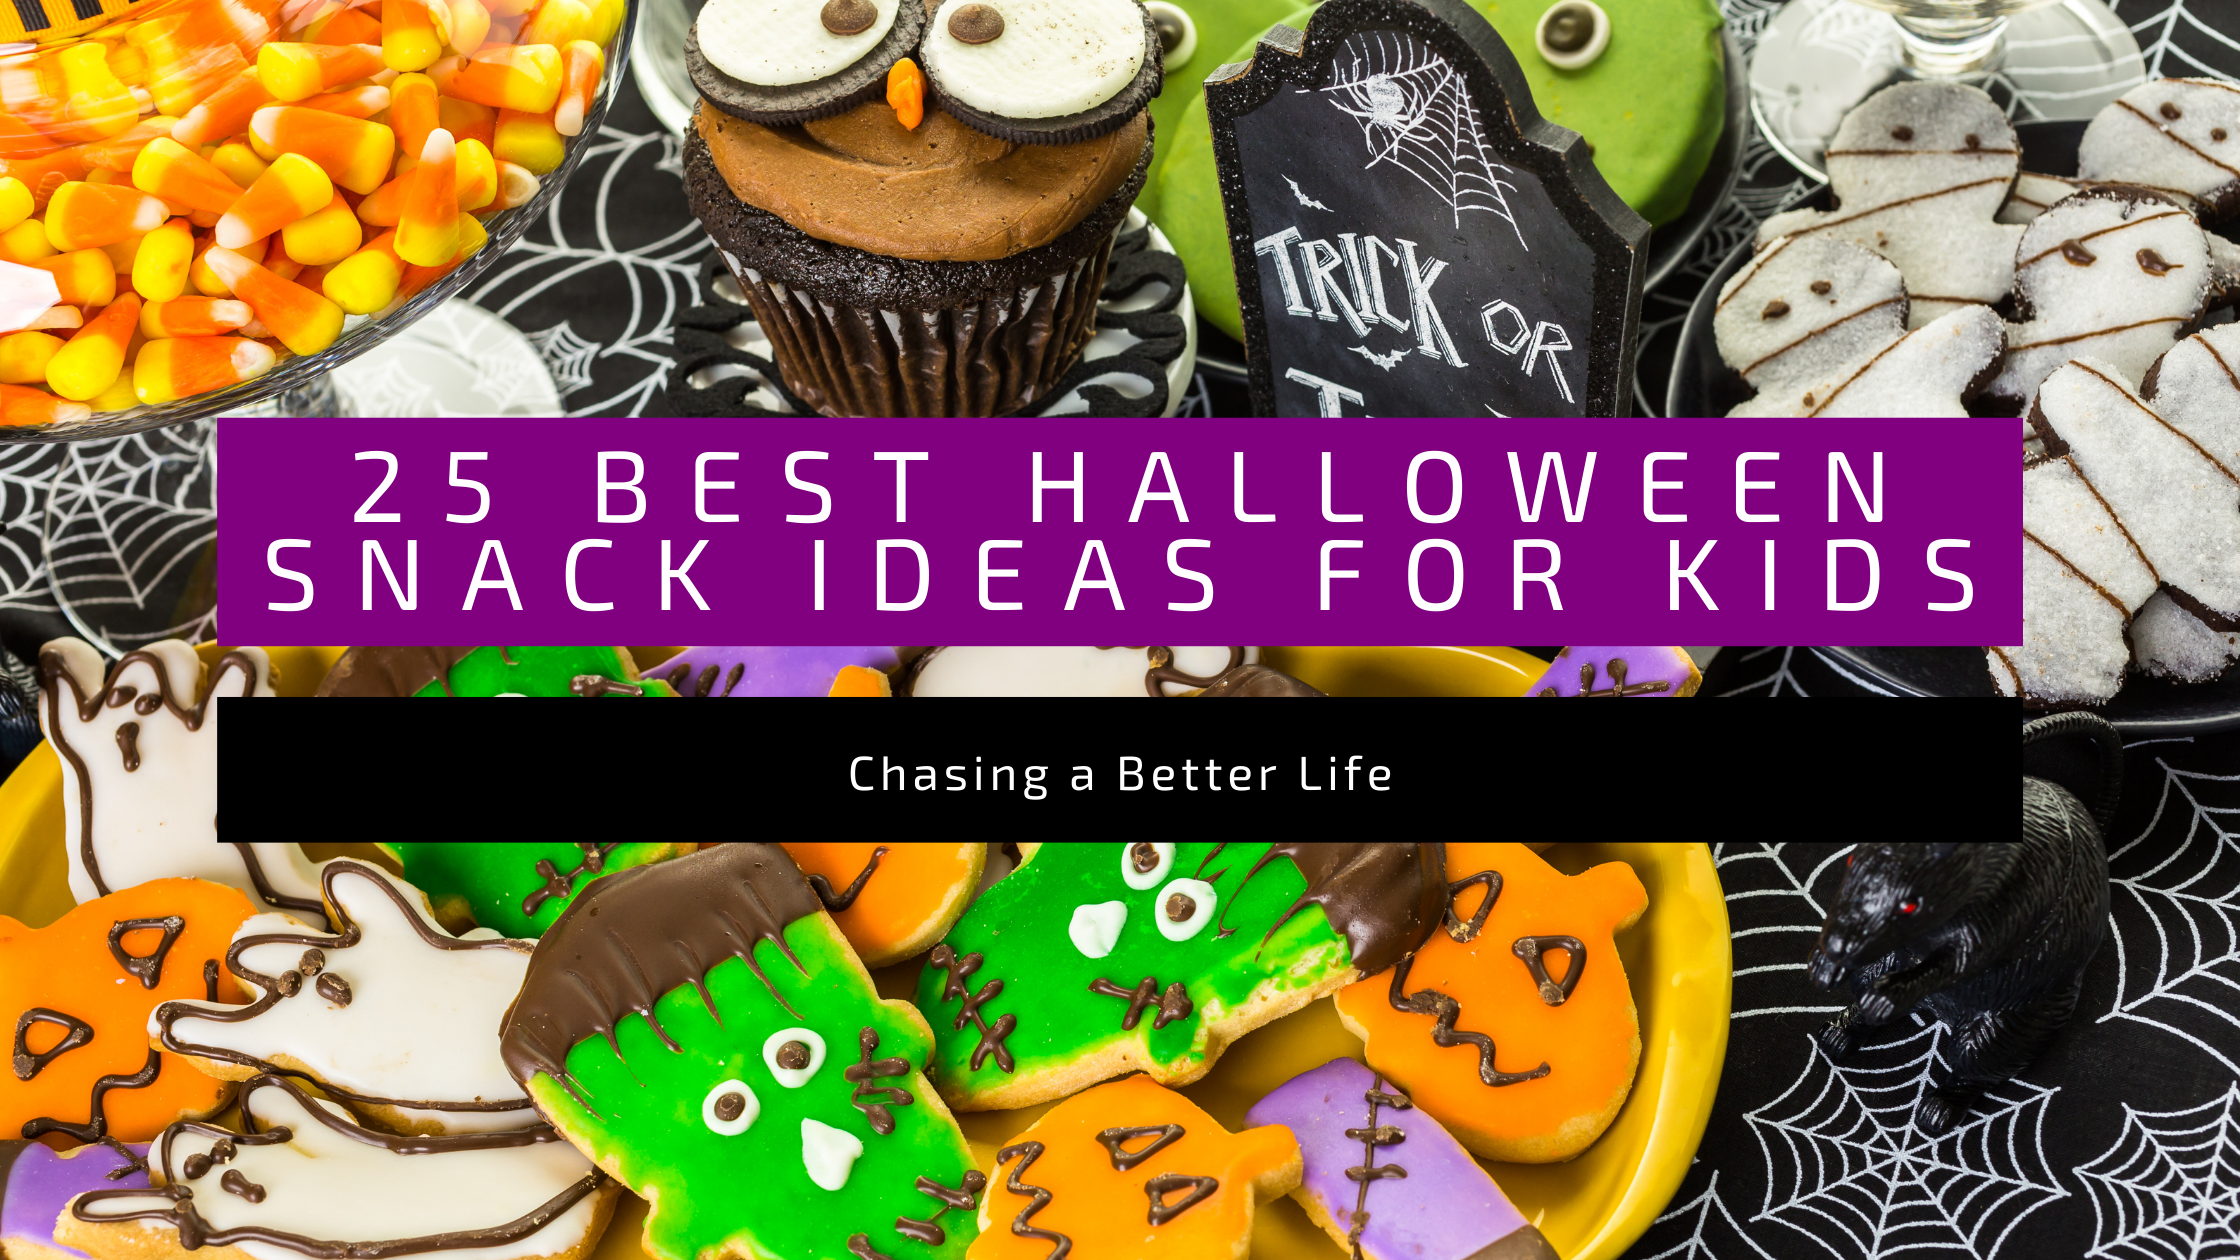 The 25 Best Halloween Snack Ideas for Kids 1